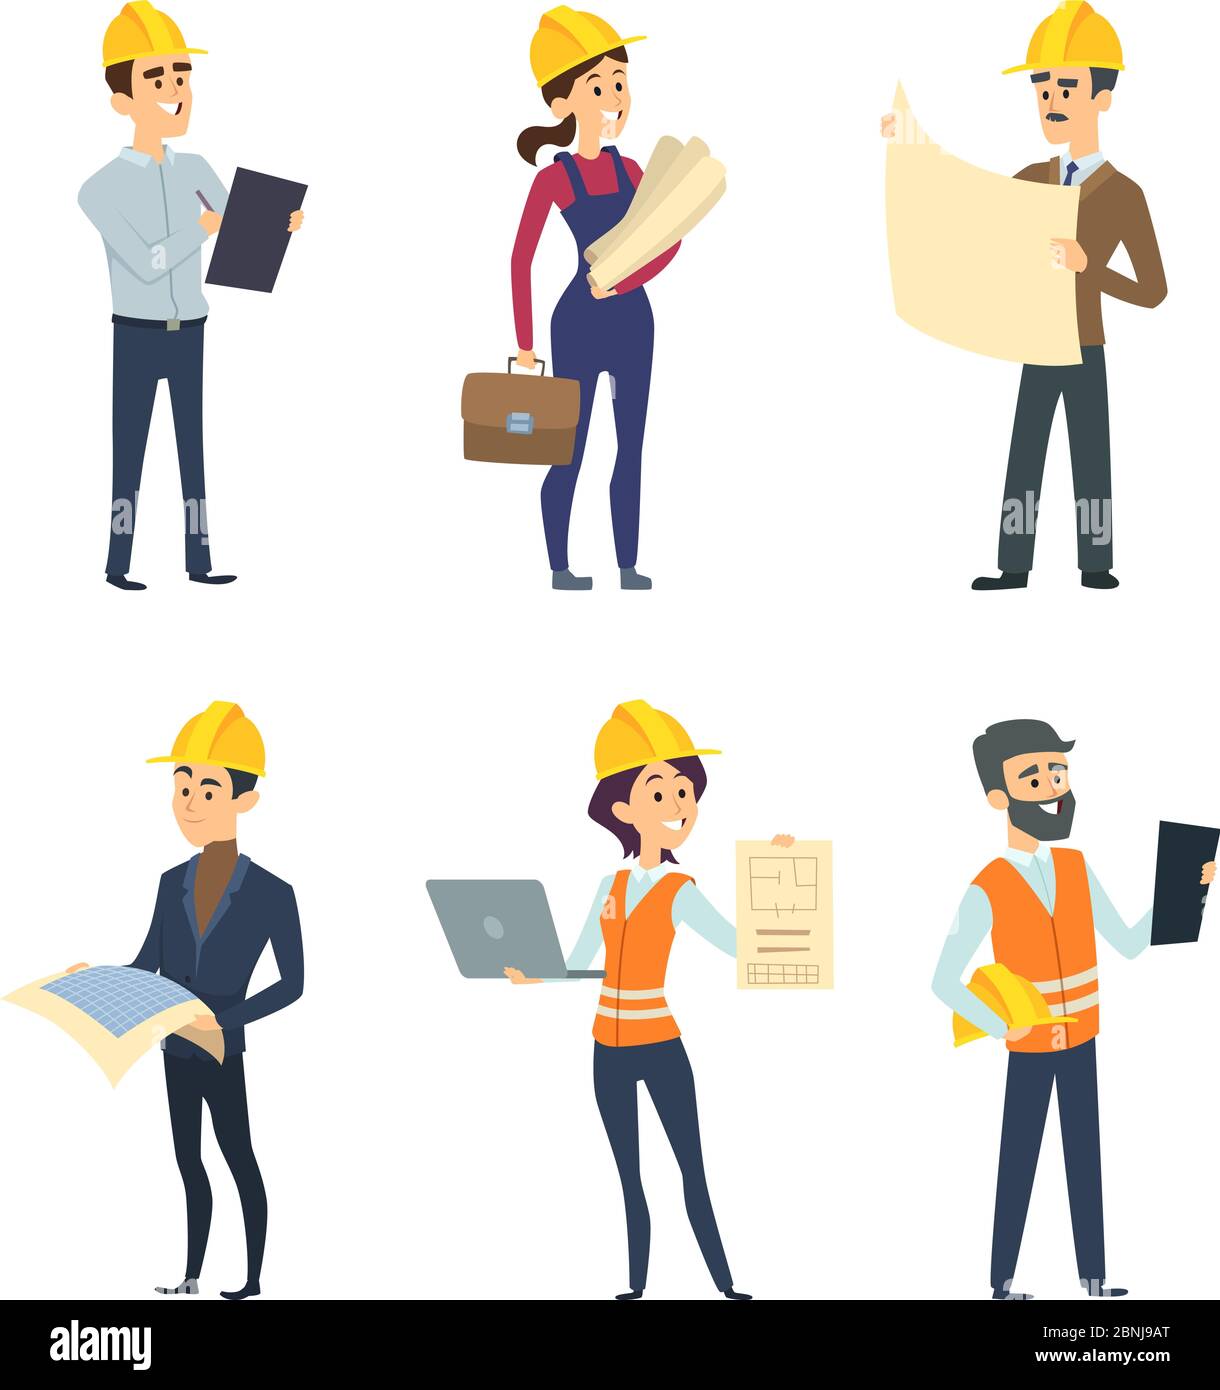 Male and female workers of engineers and other technician professions Stock Vector